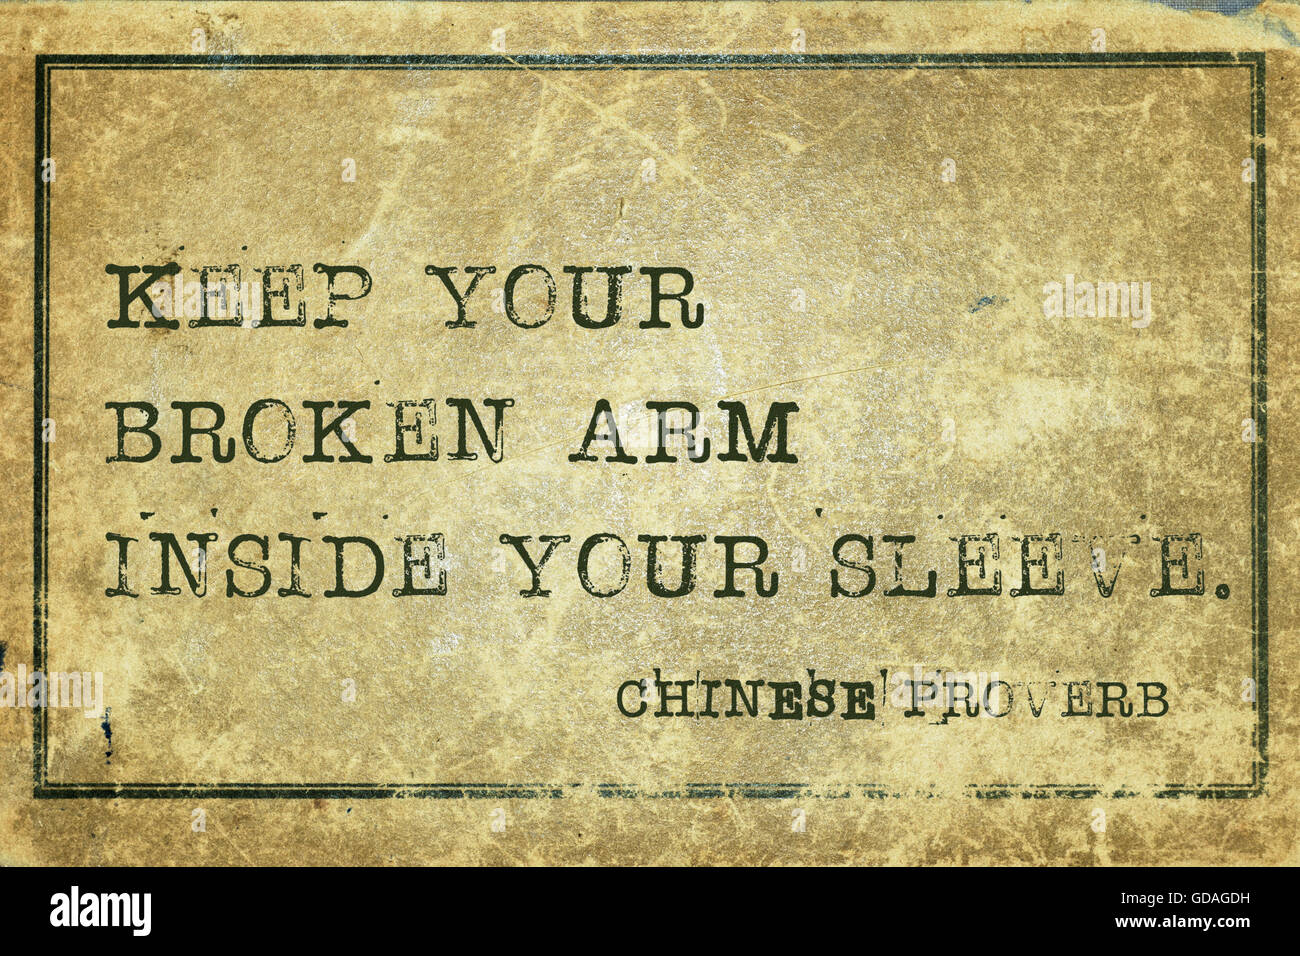 Keep your broken arm inside your sleeve - ancient Chinese proverb printed on grunge vintage cardboard Stock Photo